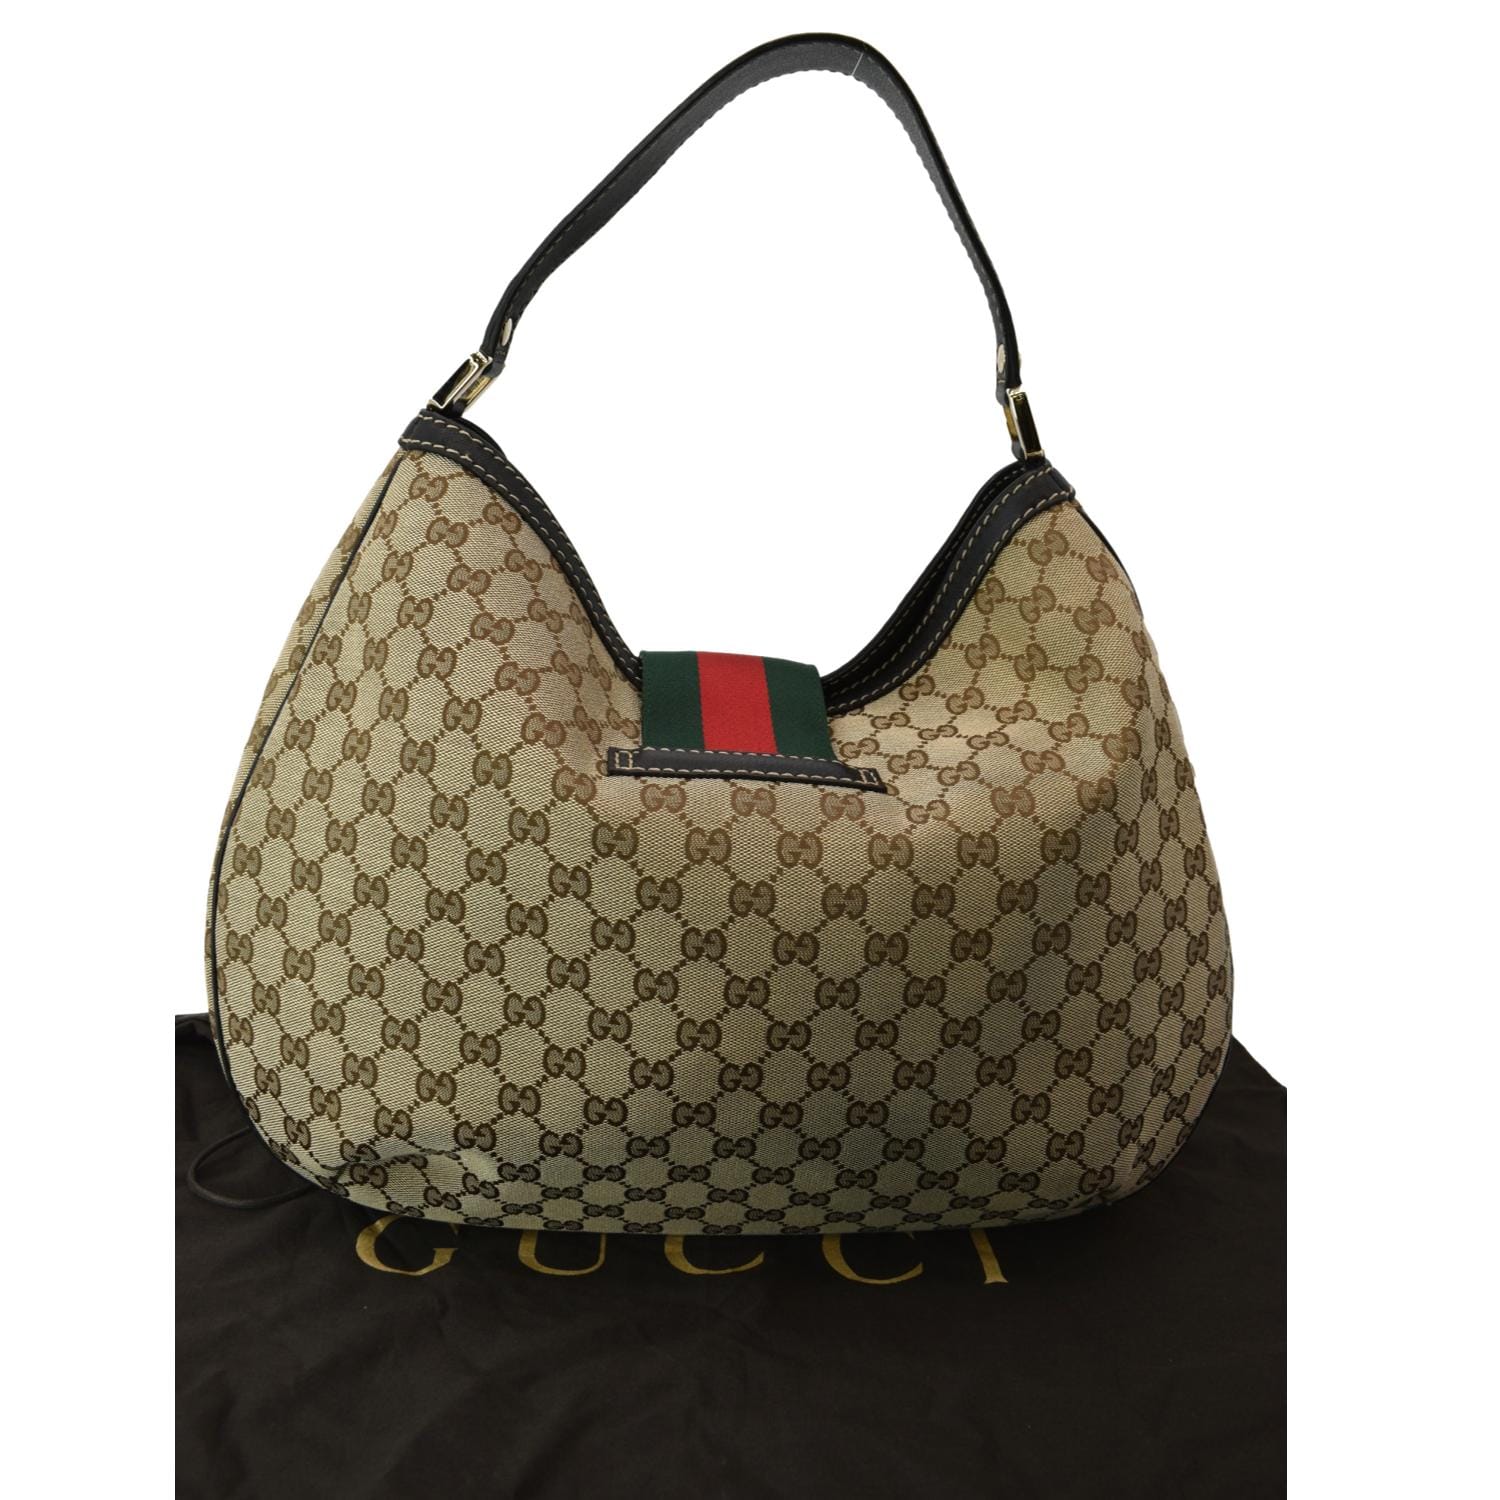 Gucci Shopping Tote Vintage Web Canvas Large Auction